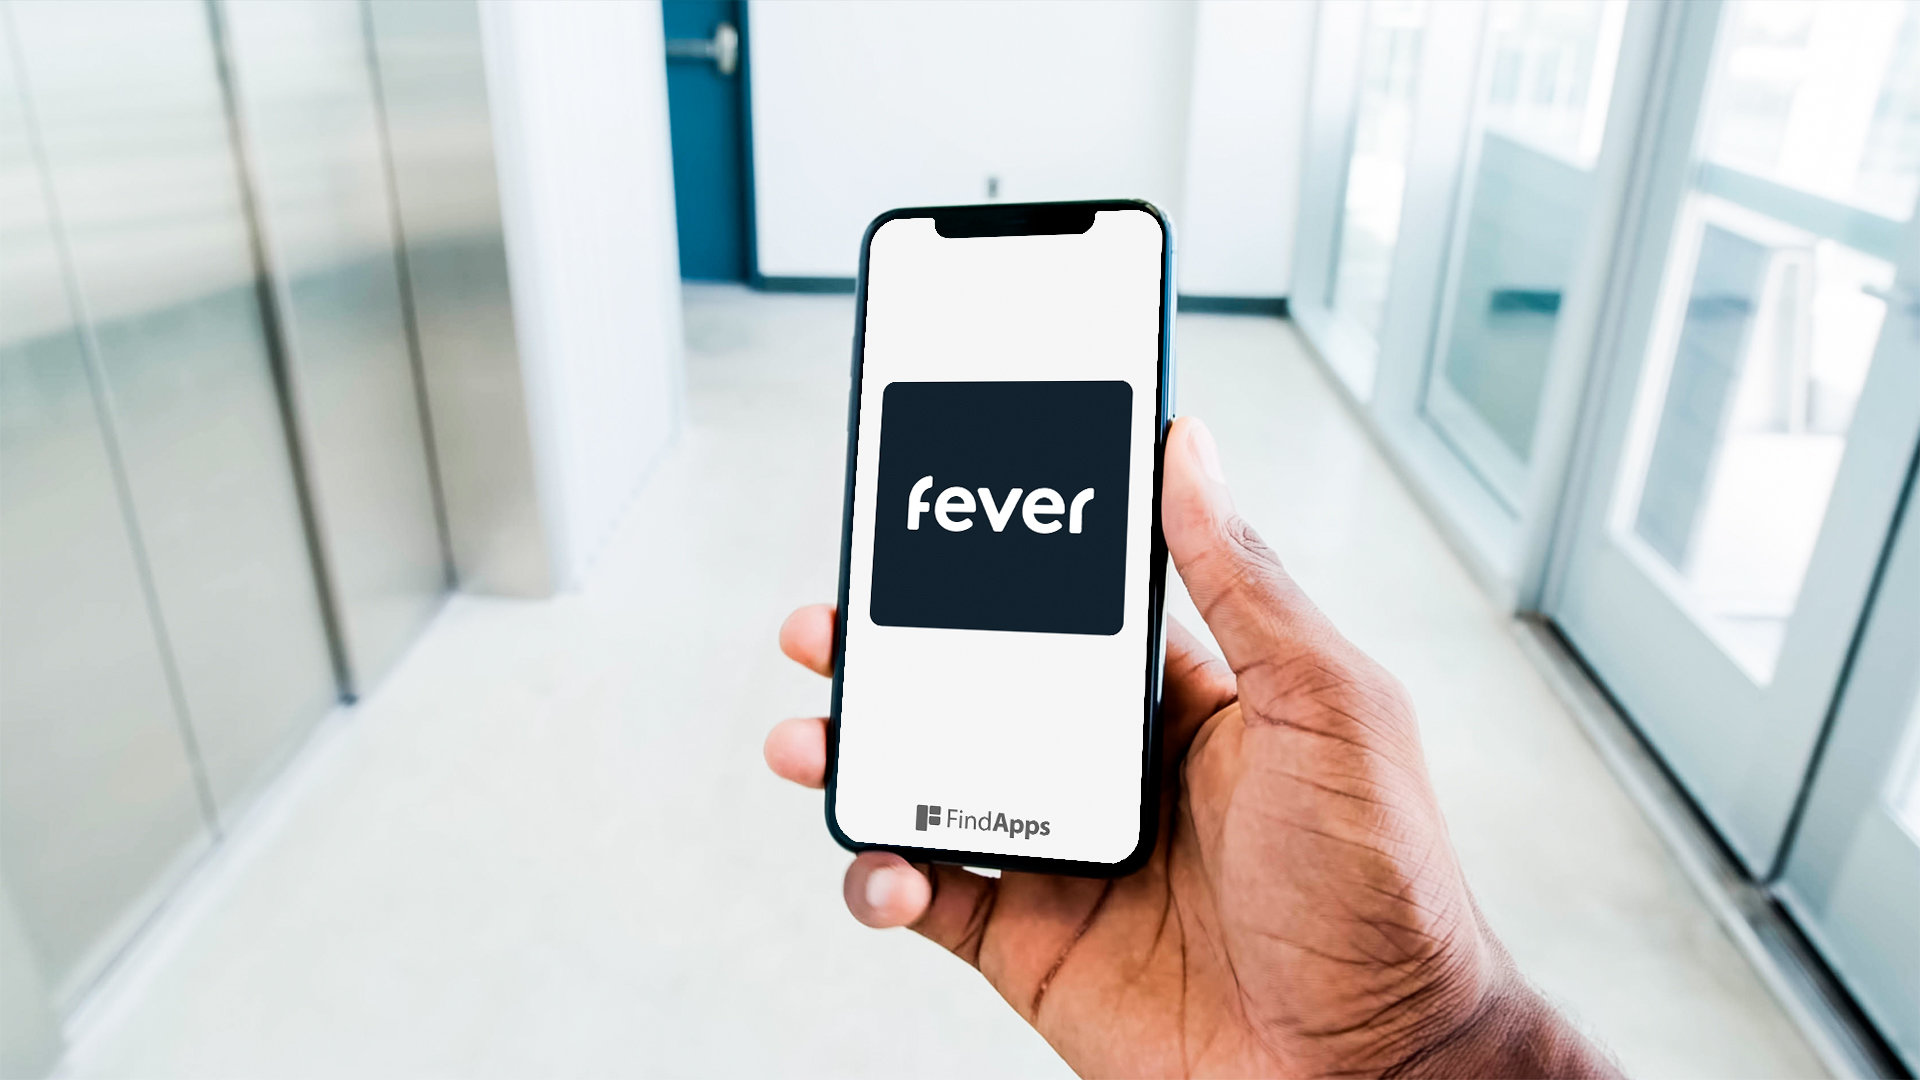 "Fever: Local Events & Tickets" app, review.